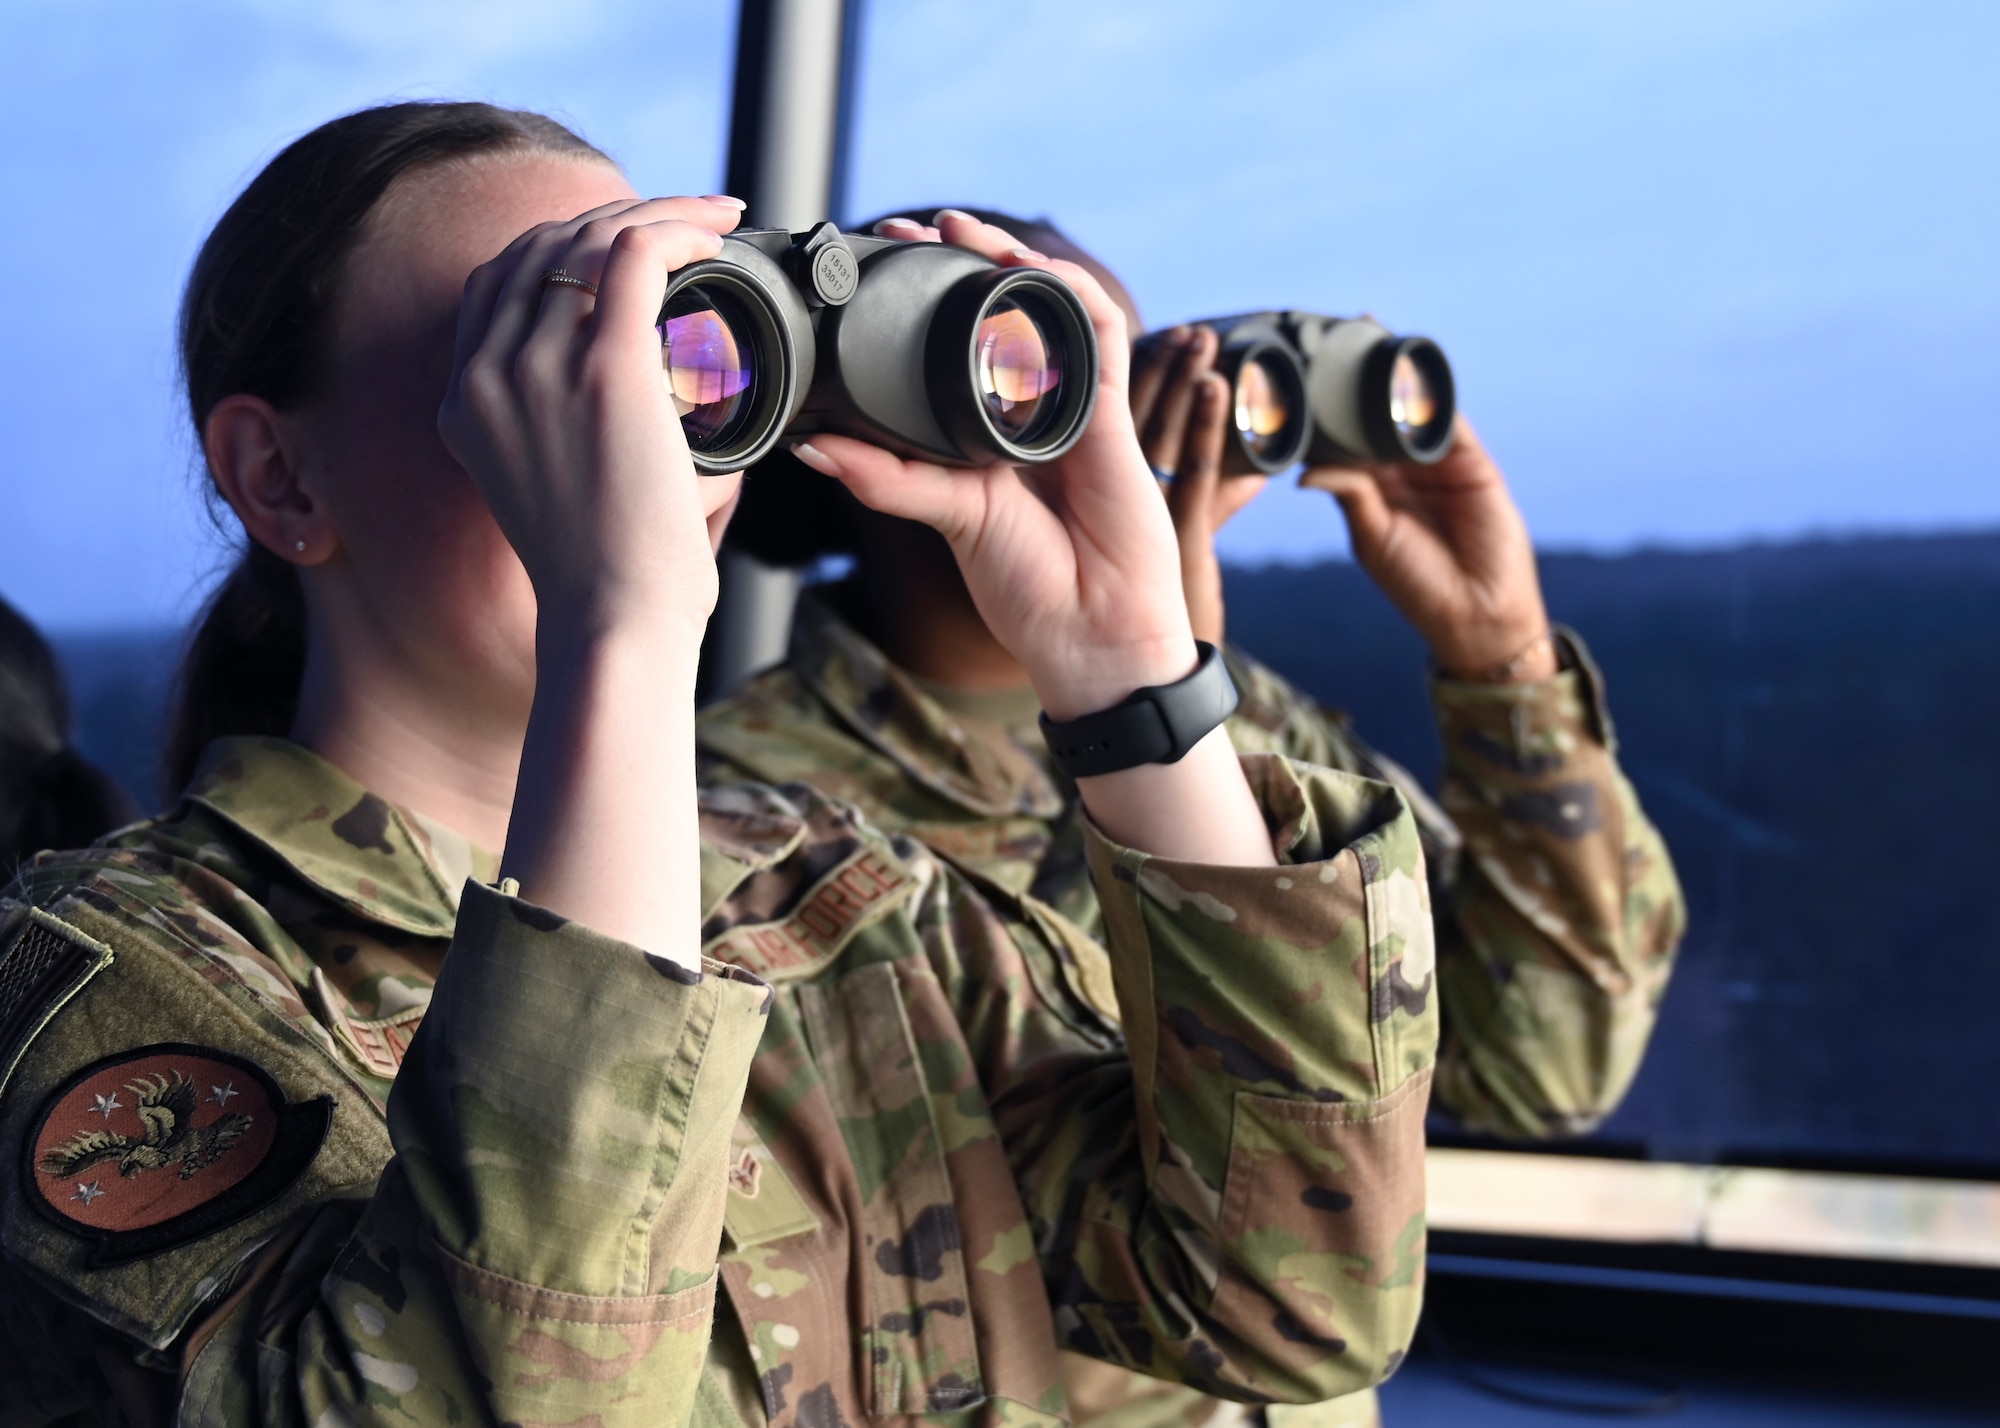 U.S. Air Force Airman 1st Class Erika Weatherly, left, 62d Comptroller Squadron budget analyst and Senior Airman Erica Shultz, 62d Medical Squadron bioenvironmental engineer journeyman, look through binoculars in the air traffic control tower at Columbus Air Force Base, Miss., Feb. 15, 2023. Team McChord Airmen toured Columbus AFB and gained first-hand experience of their mission: Produce Pilots, Advance Airmen, Feed the Fight. (U.S. Air Force photo by Senior Airman Callie Norton)